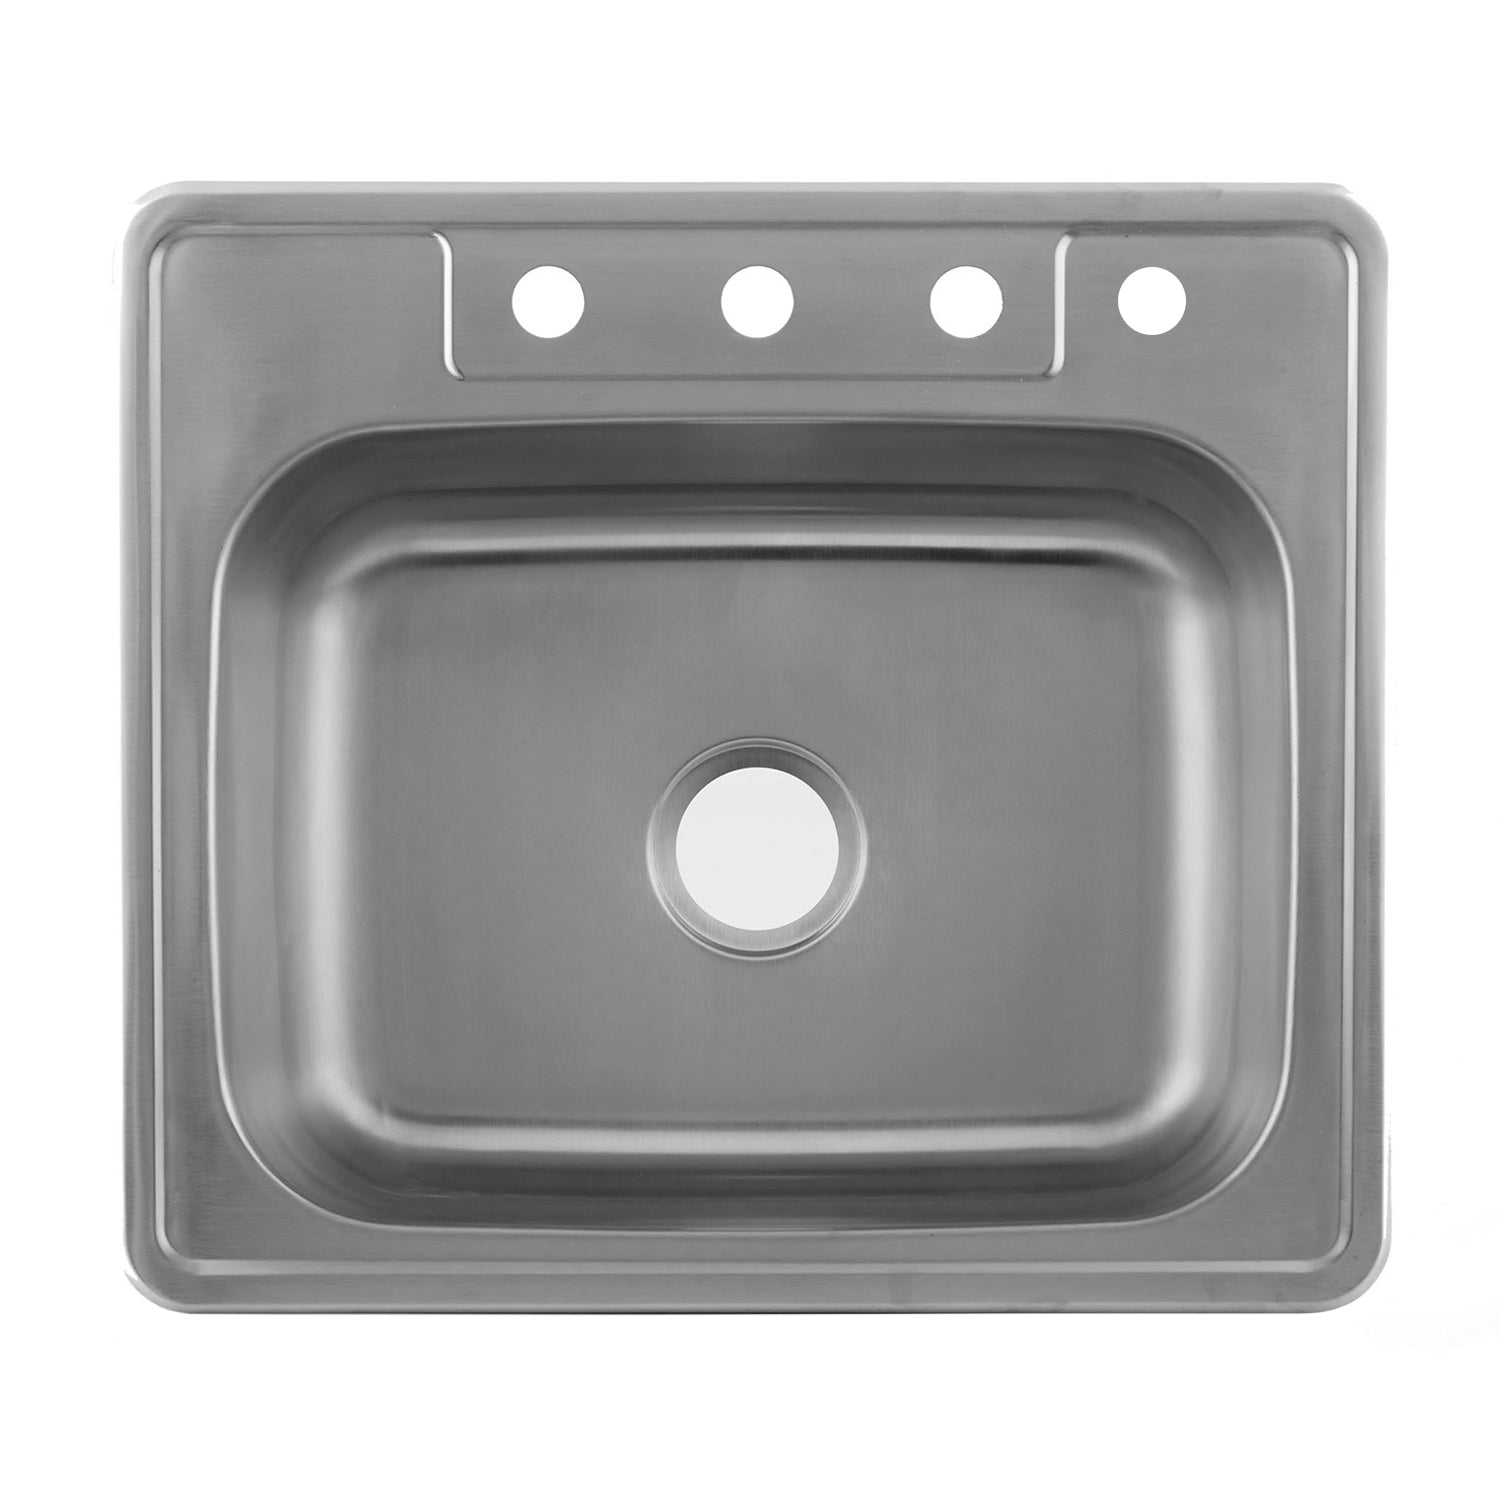 DAX  Single Bowl Top Mount Kitchen Sink, 20 Gauge Stainless Steel, Brushed Finish , 25 x 22 x 8 Inches (DAX-OM-2522)